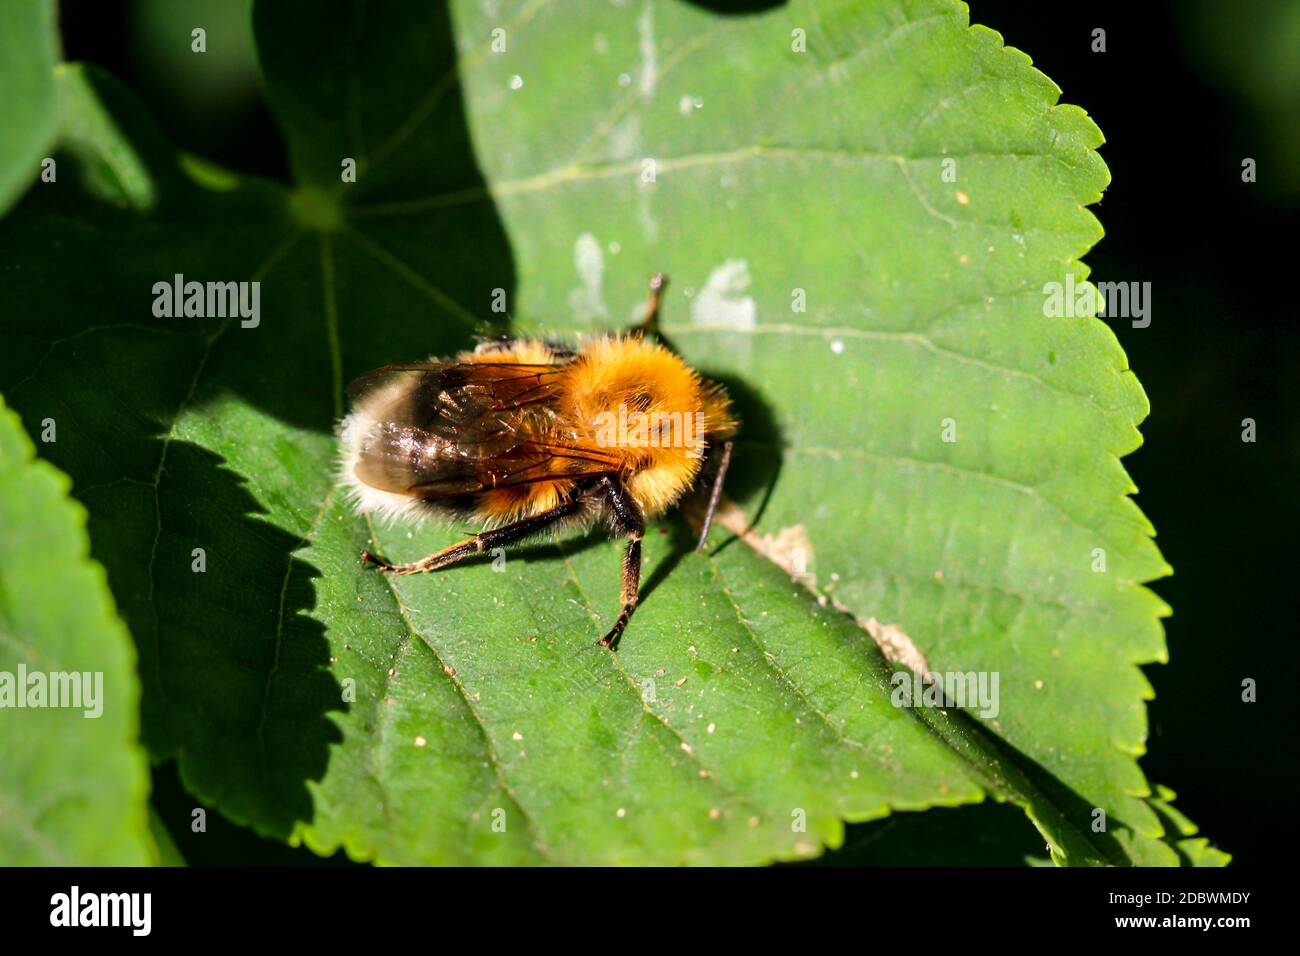 Close up of a bee-like insect on a leaf. Stock Photo